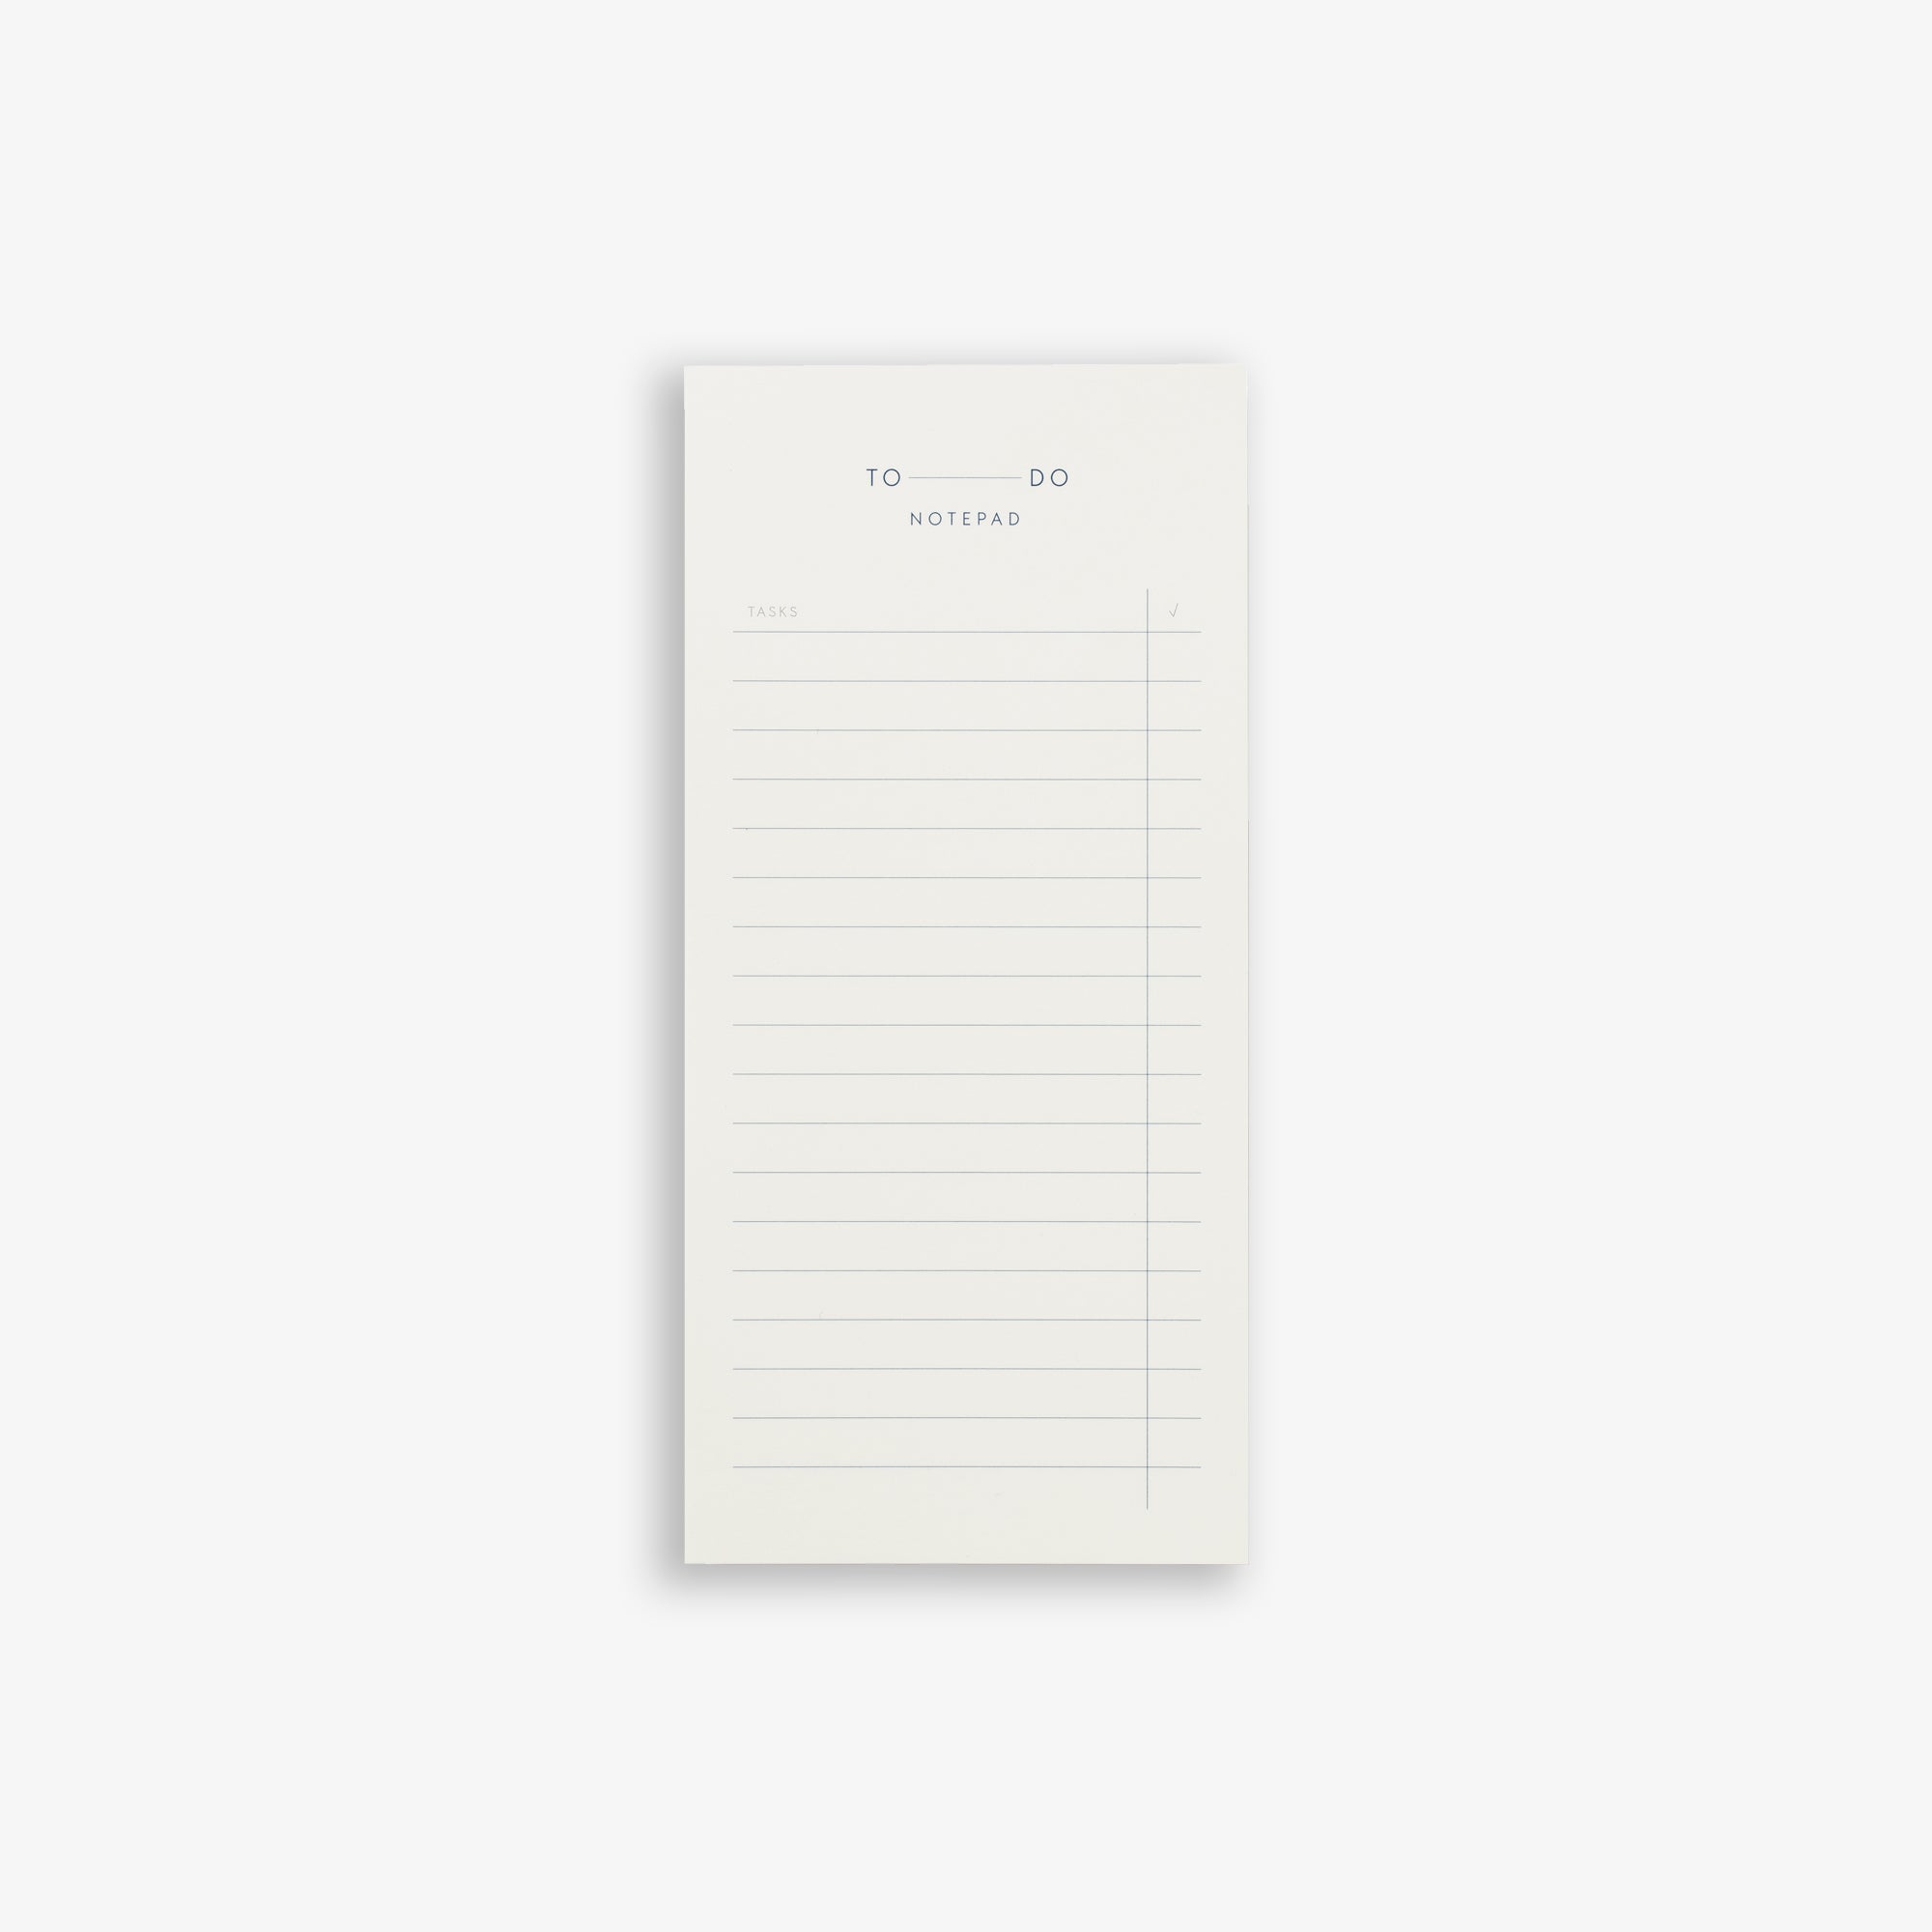 TO DO NOTEPAD